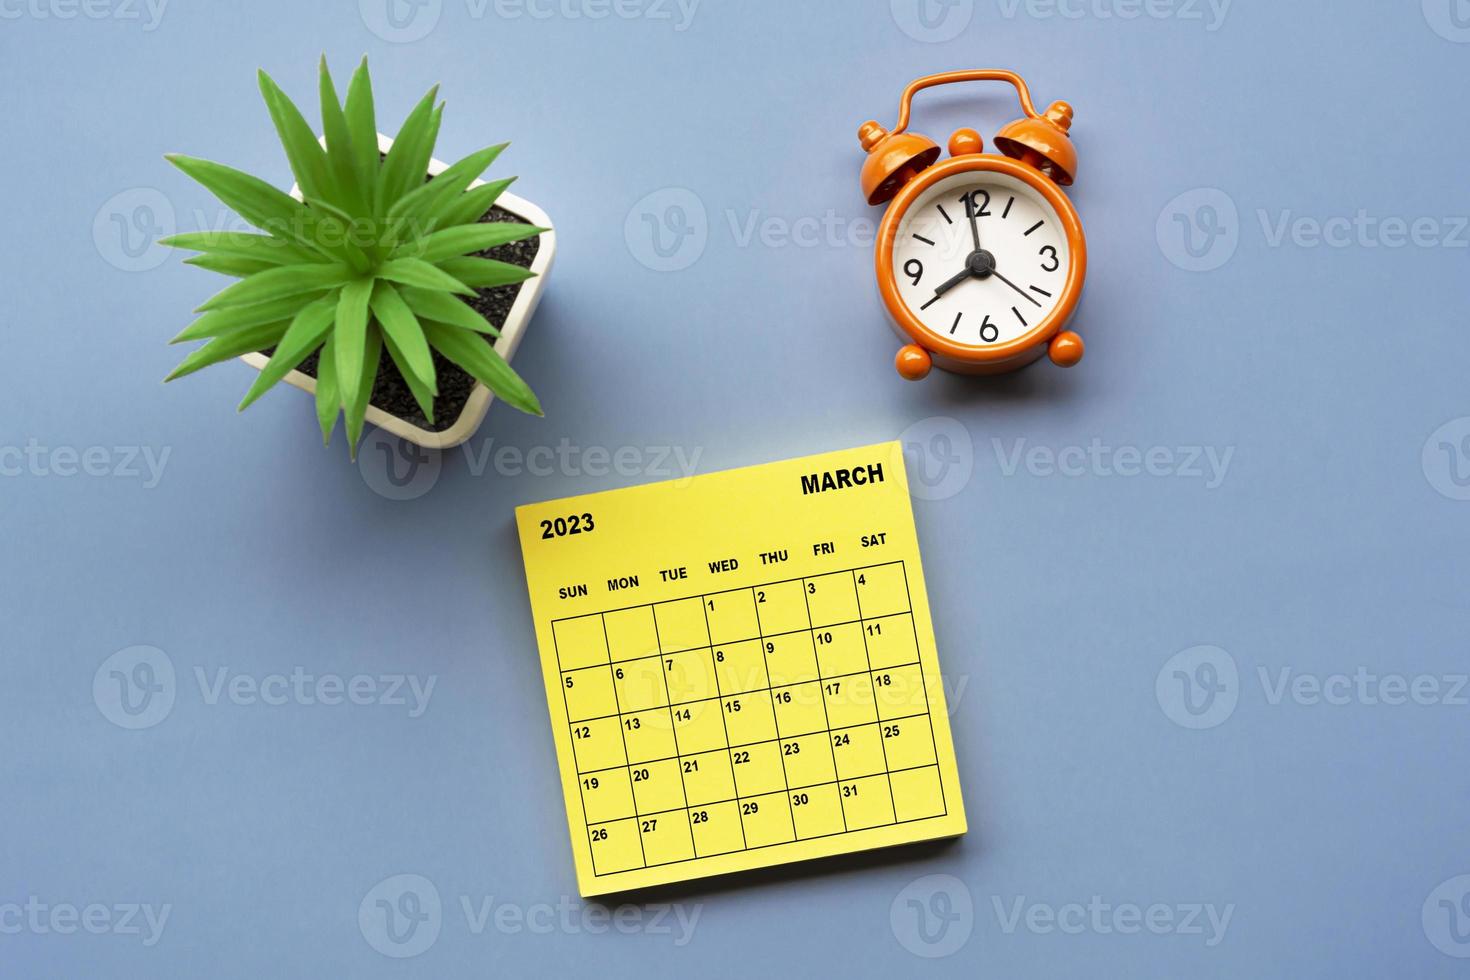 March 2023 calendar on adhesive note with alarm clock set at 8 o'clock. photo